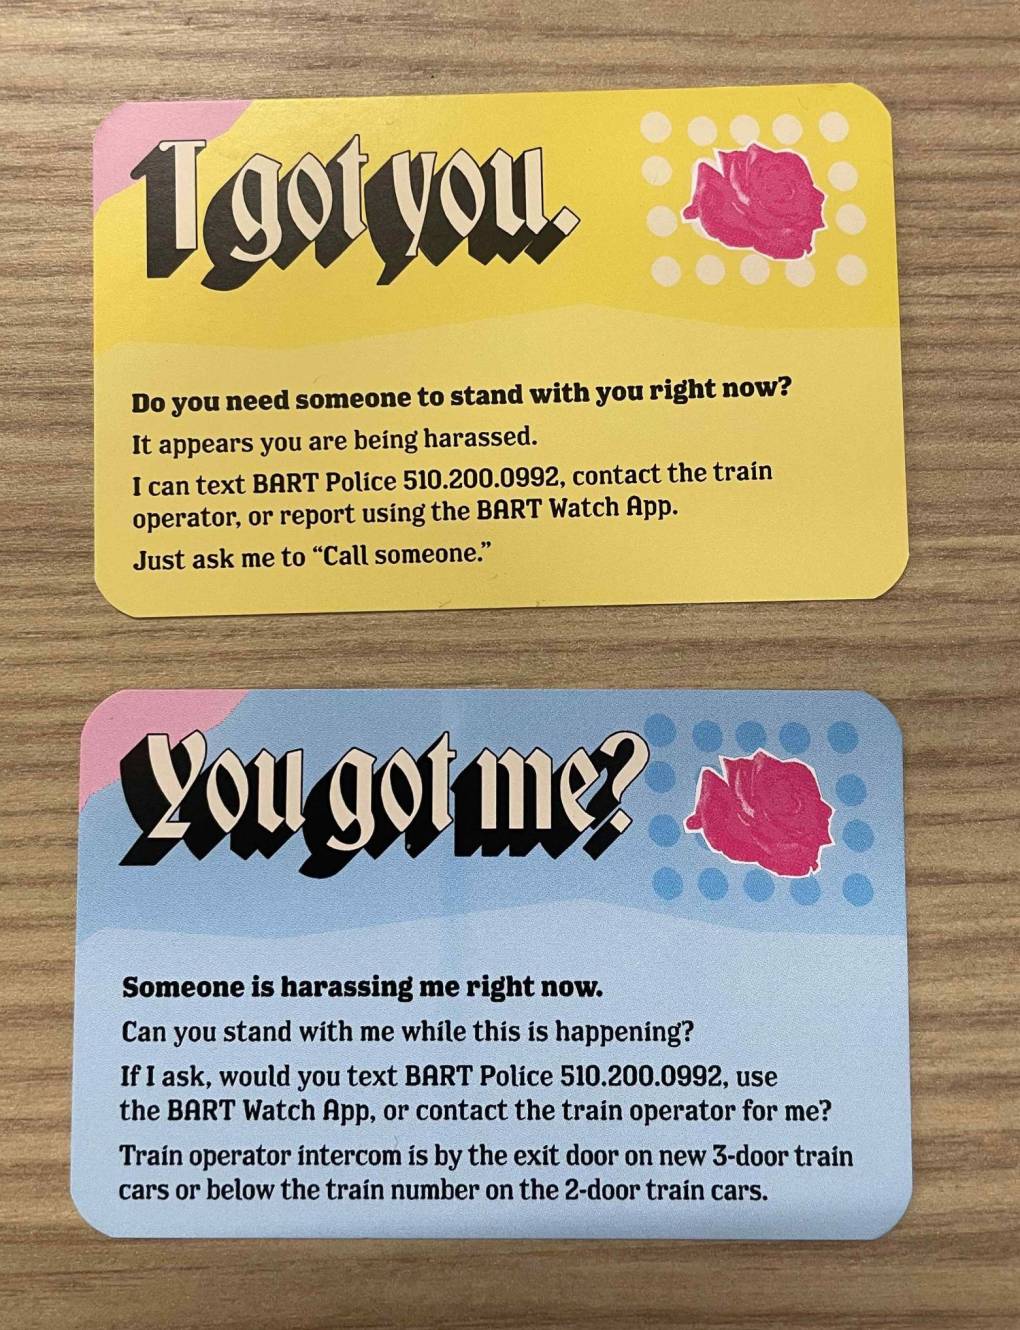 two colorful cards say 'i got you' and 'you got me?'